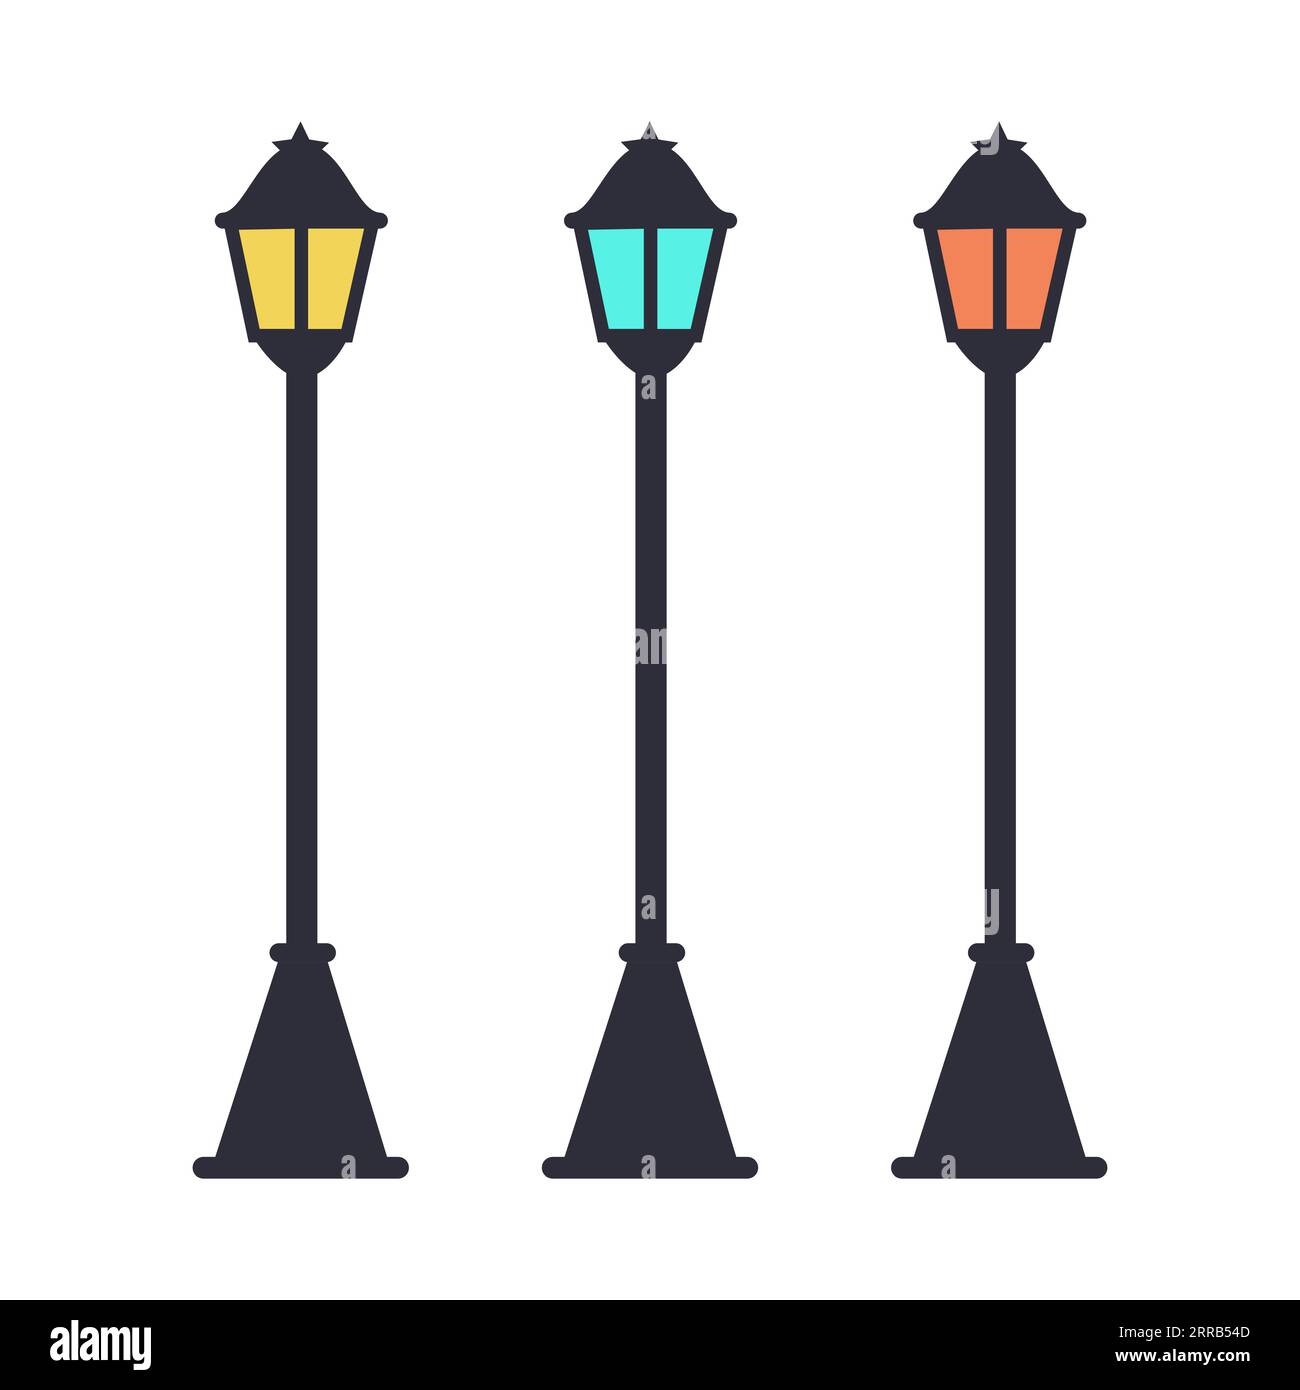 Retro Vintage Street lights, Street lamps And Lamp posts Flat Style Vector Illustration Stock Vector